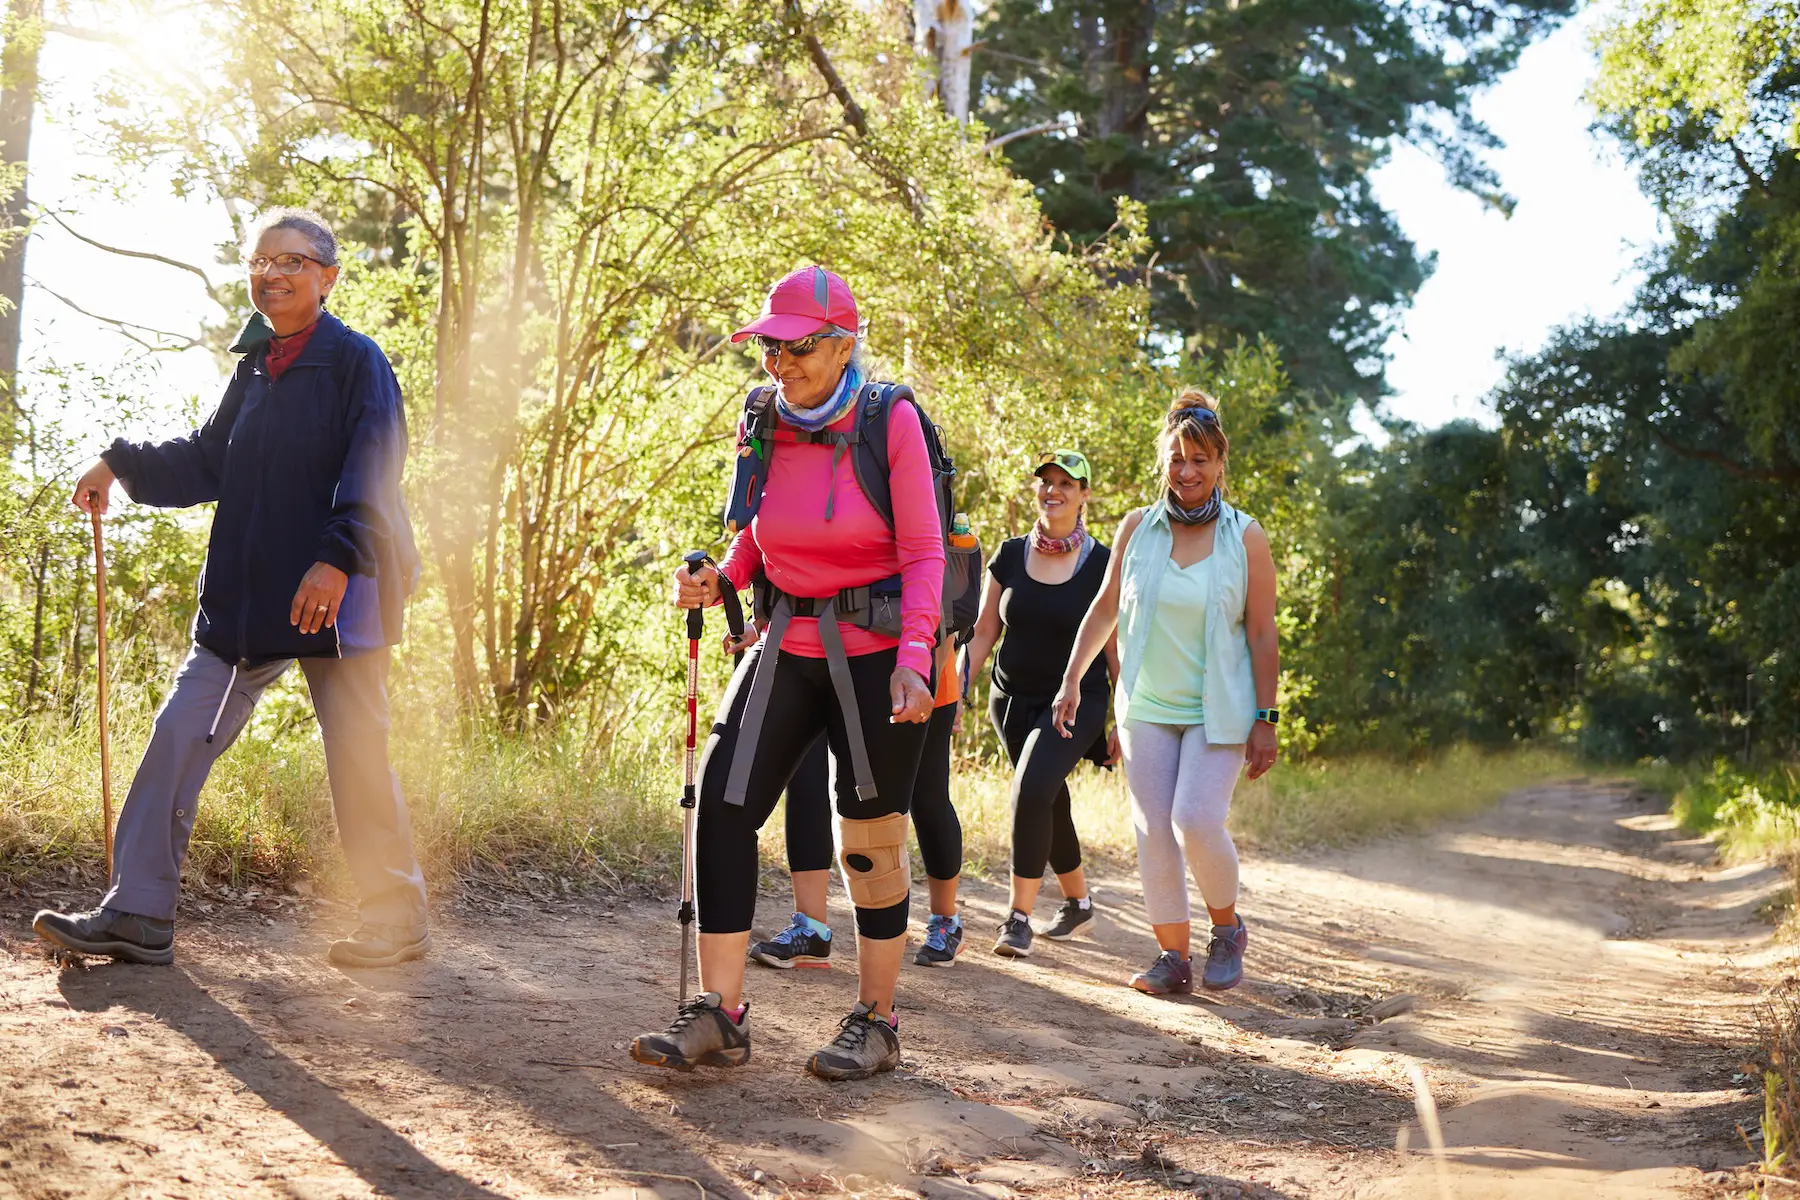 A group of five active women hike down a dirt path in a wooded area on a bright day.